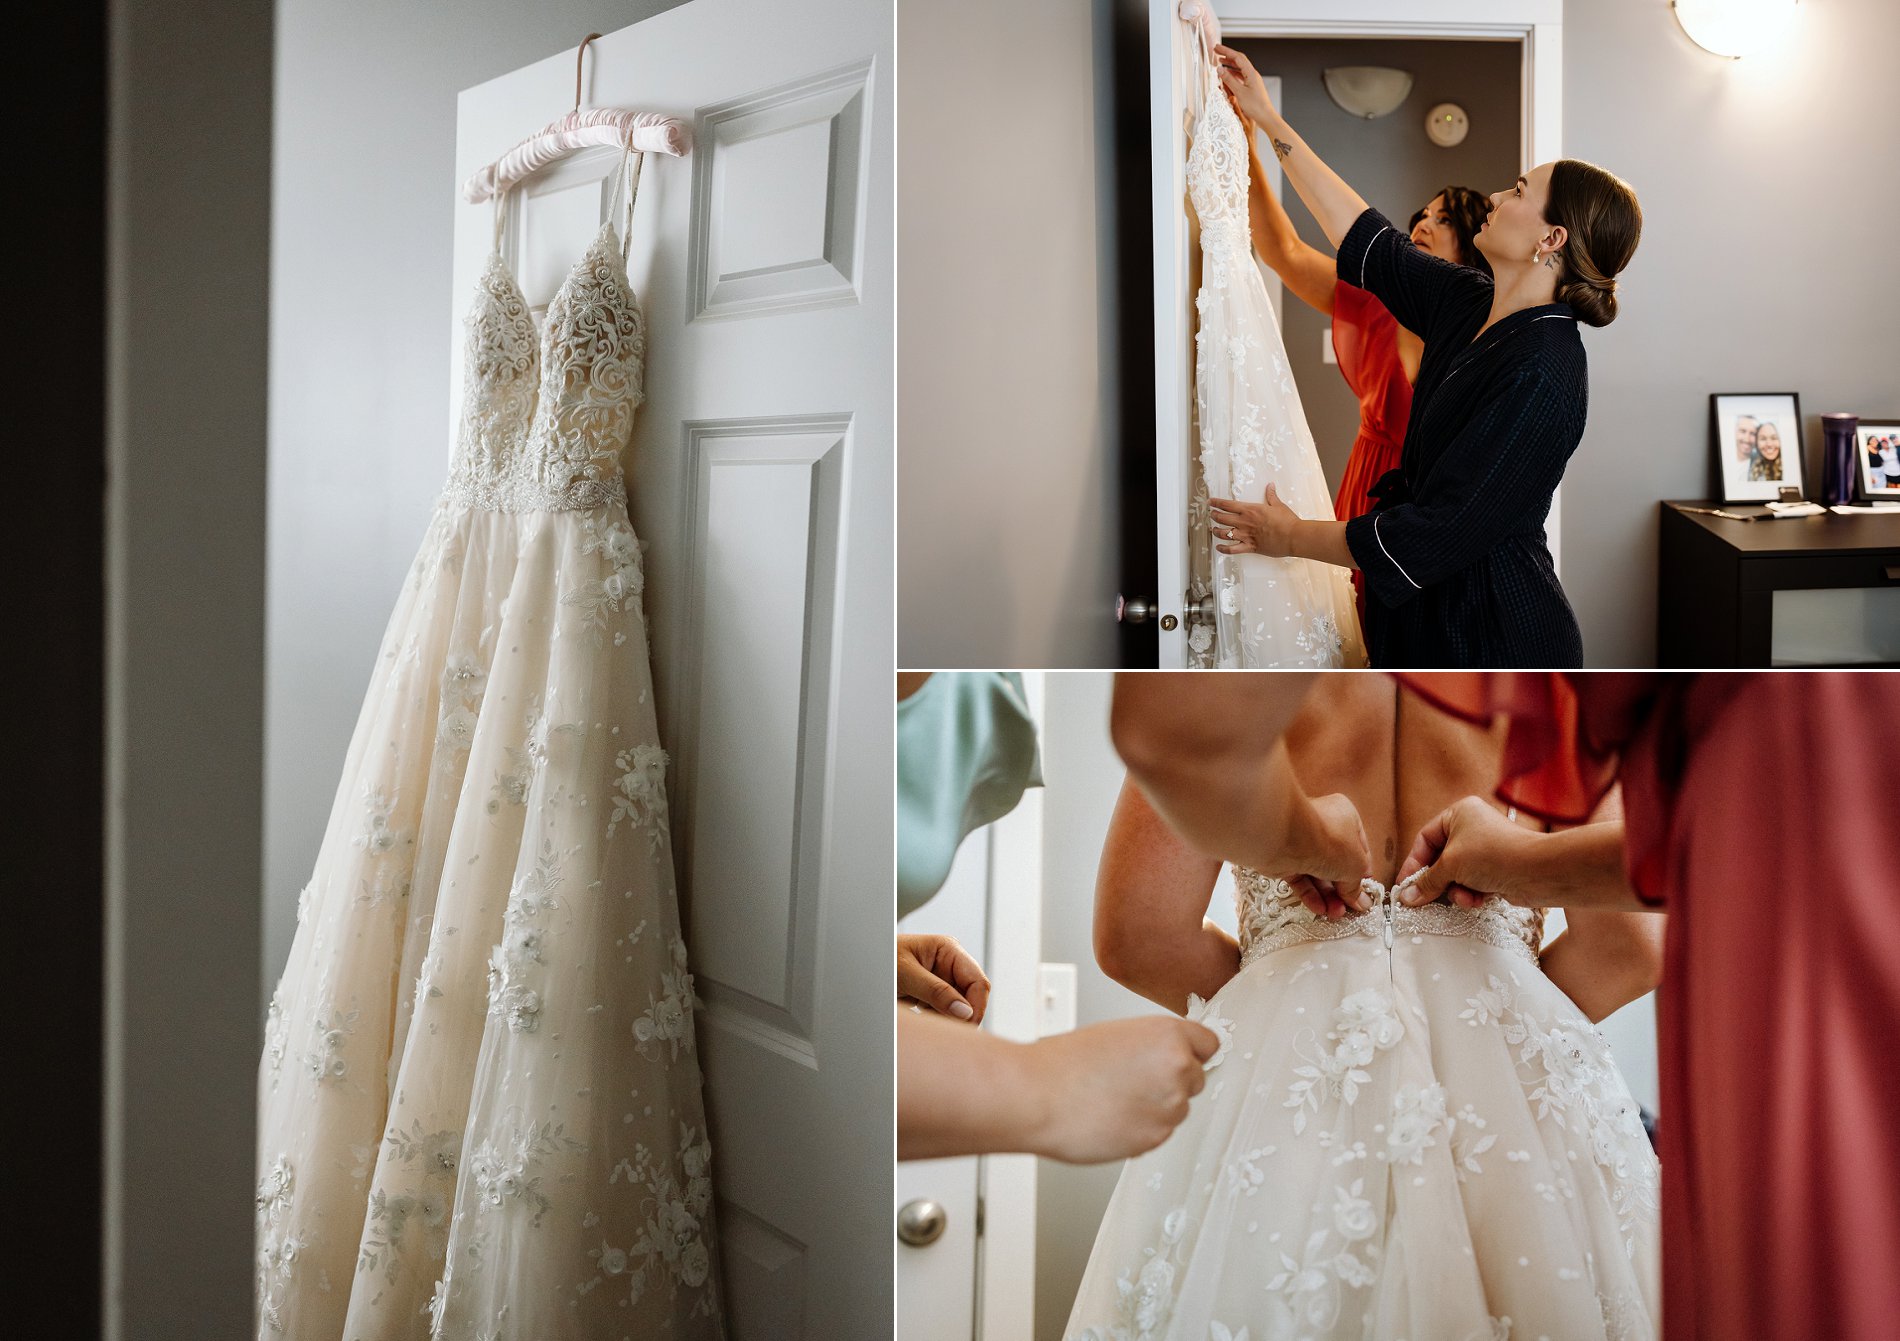 A bride's mother helps her into her wedding dress.